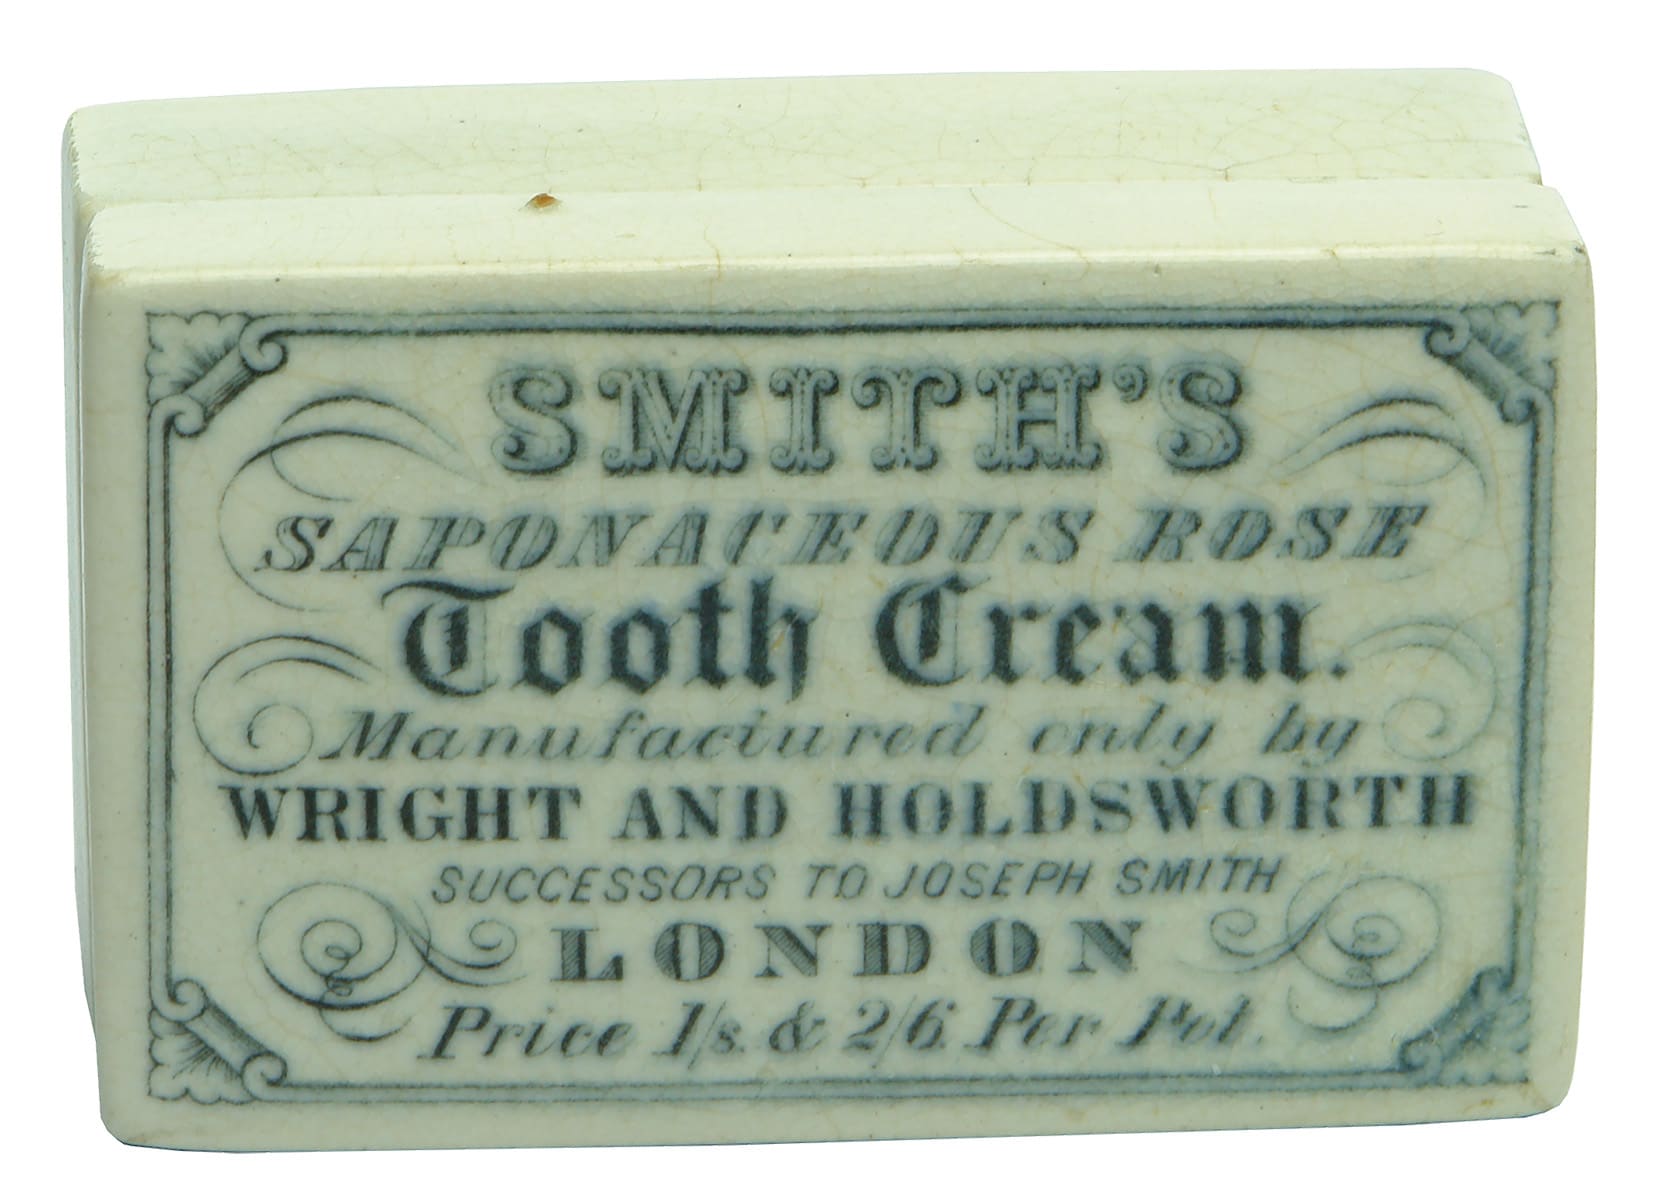 Smith's Wright Holdsworth Tooth Cream Antique Pot Lid